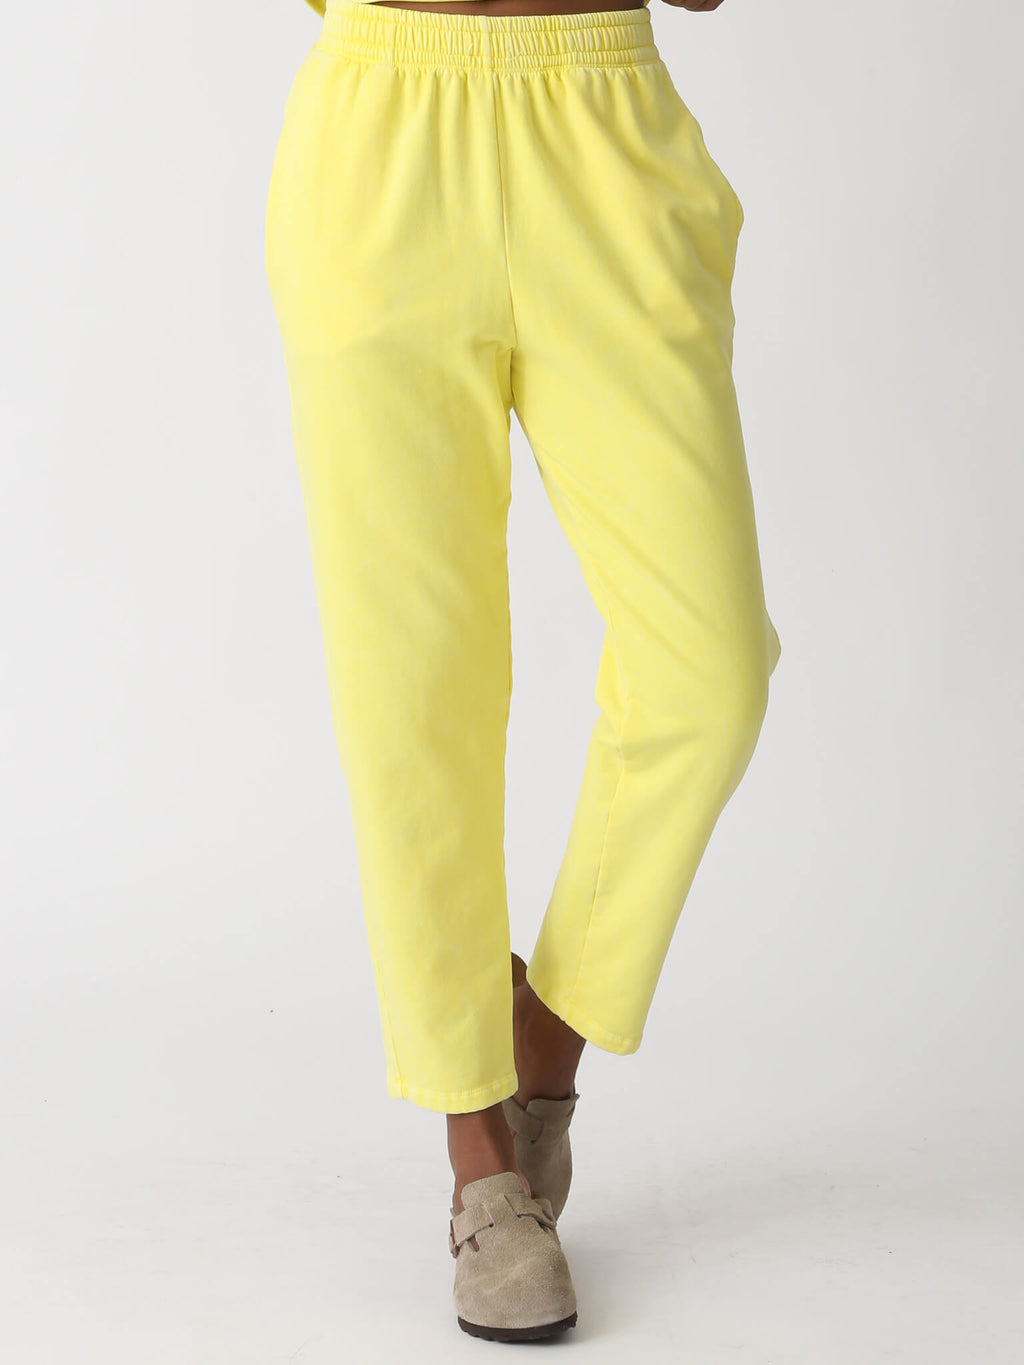 Webster Sweatpant - Vintage Mellow Yellow